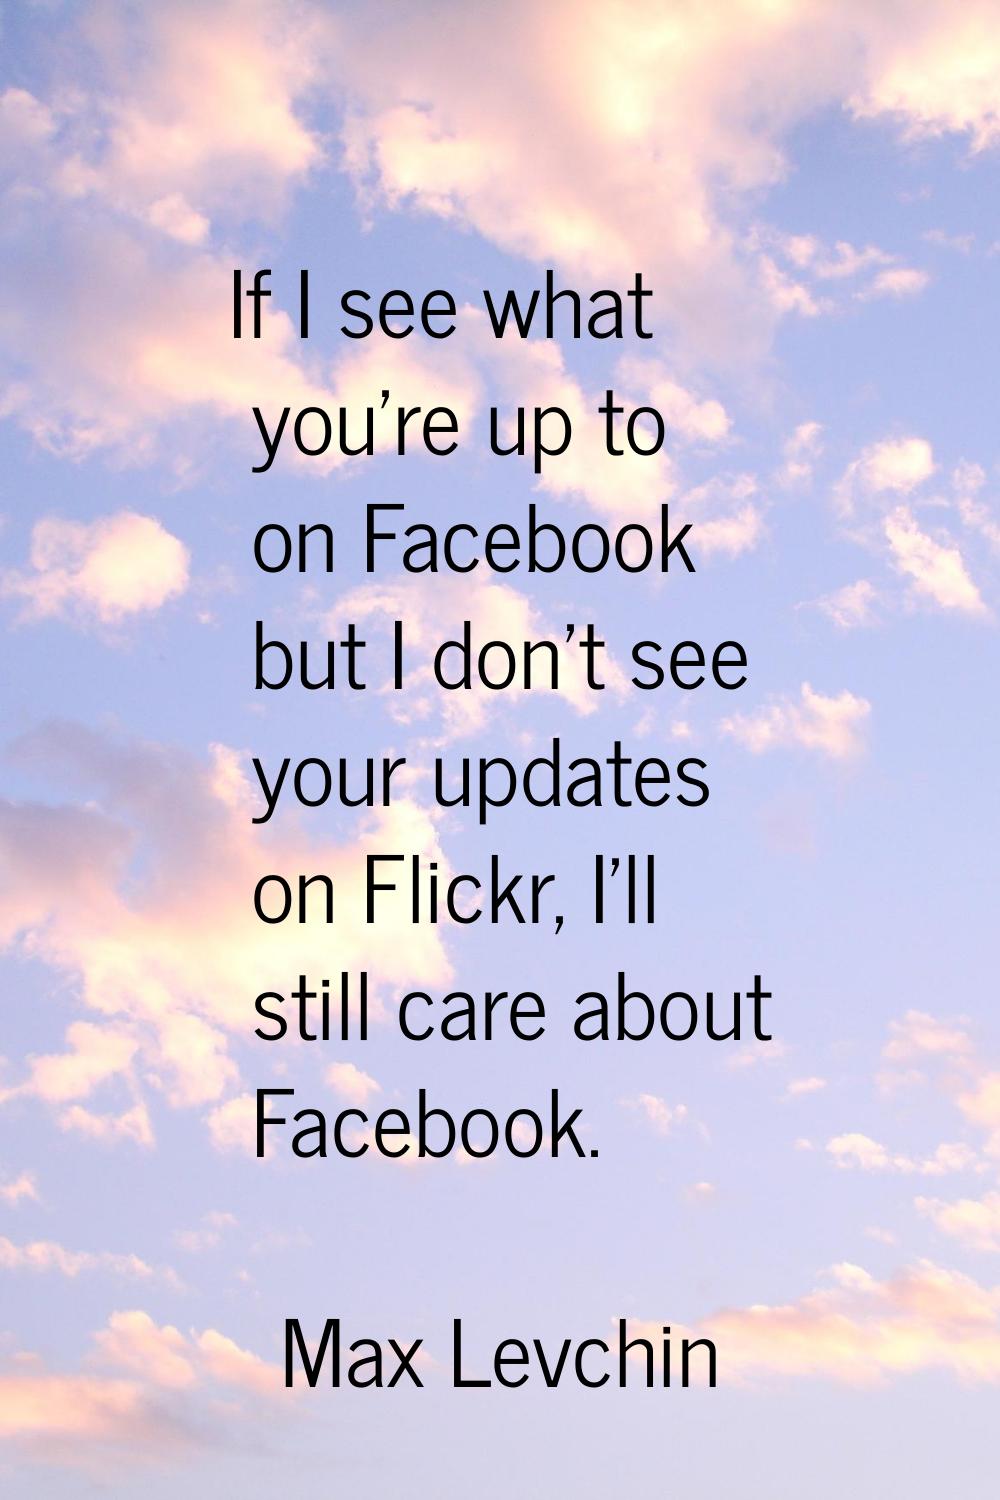 If I see what you're up to on Facebook but I don't see your updates on Flickr, I'll still care abou